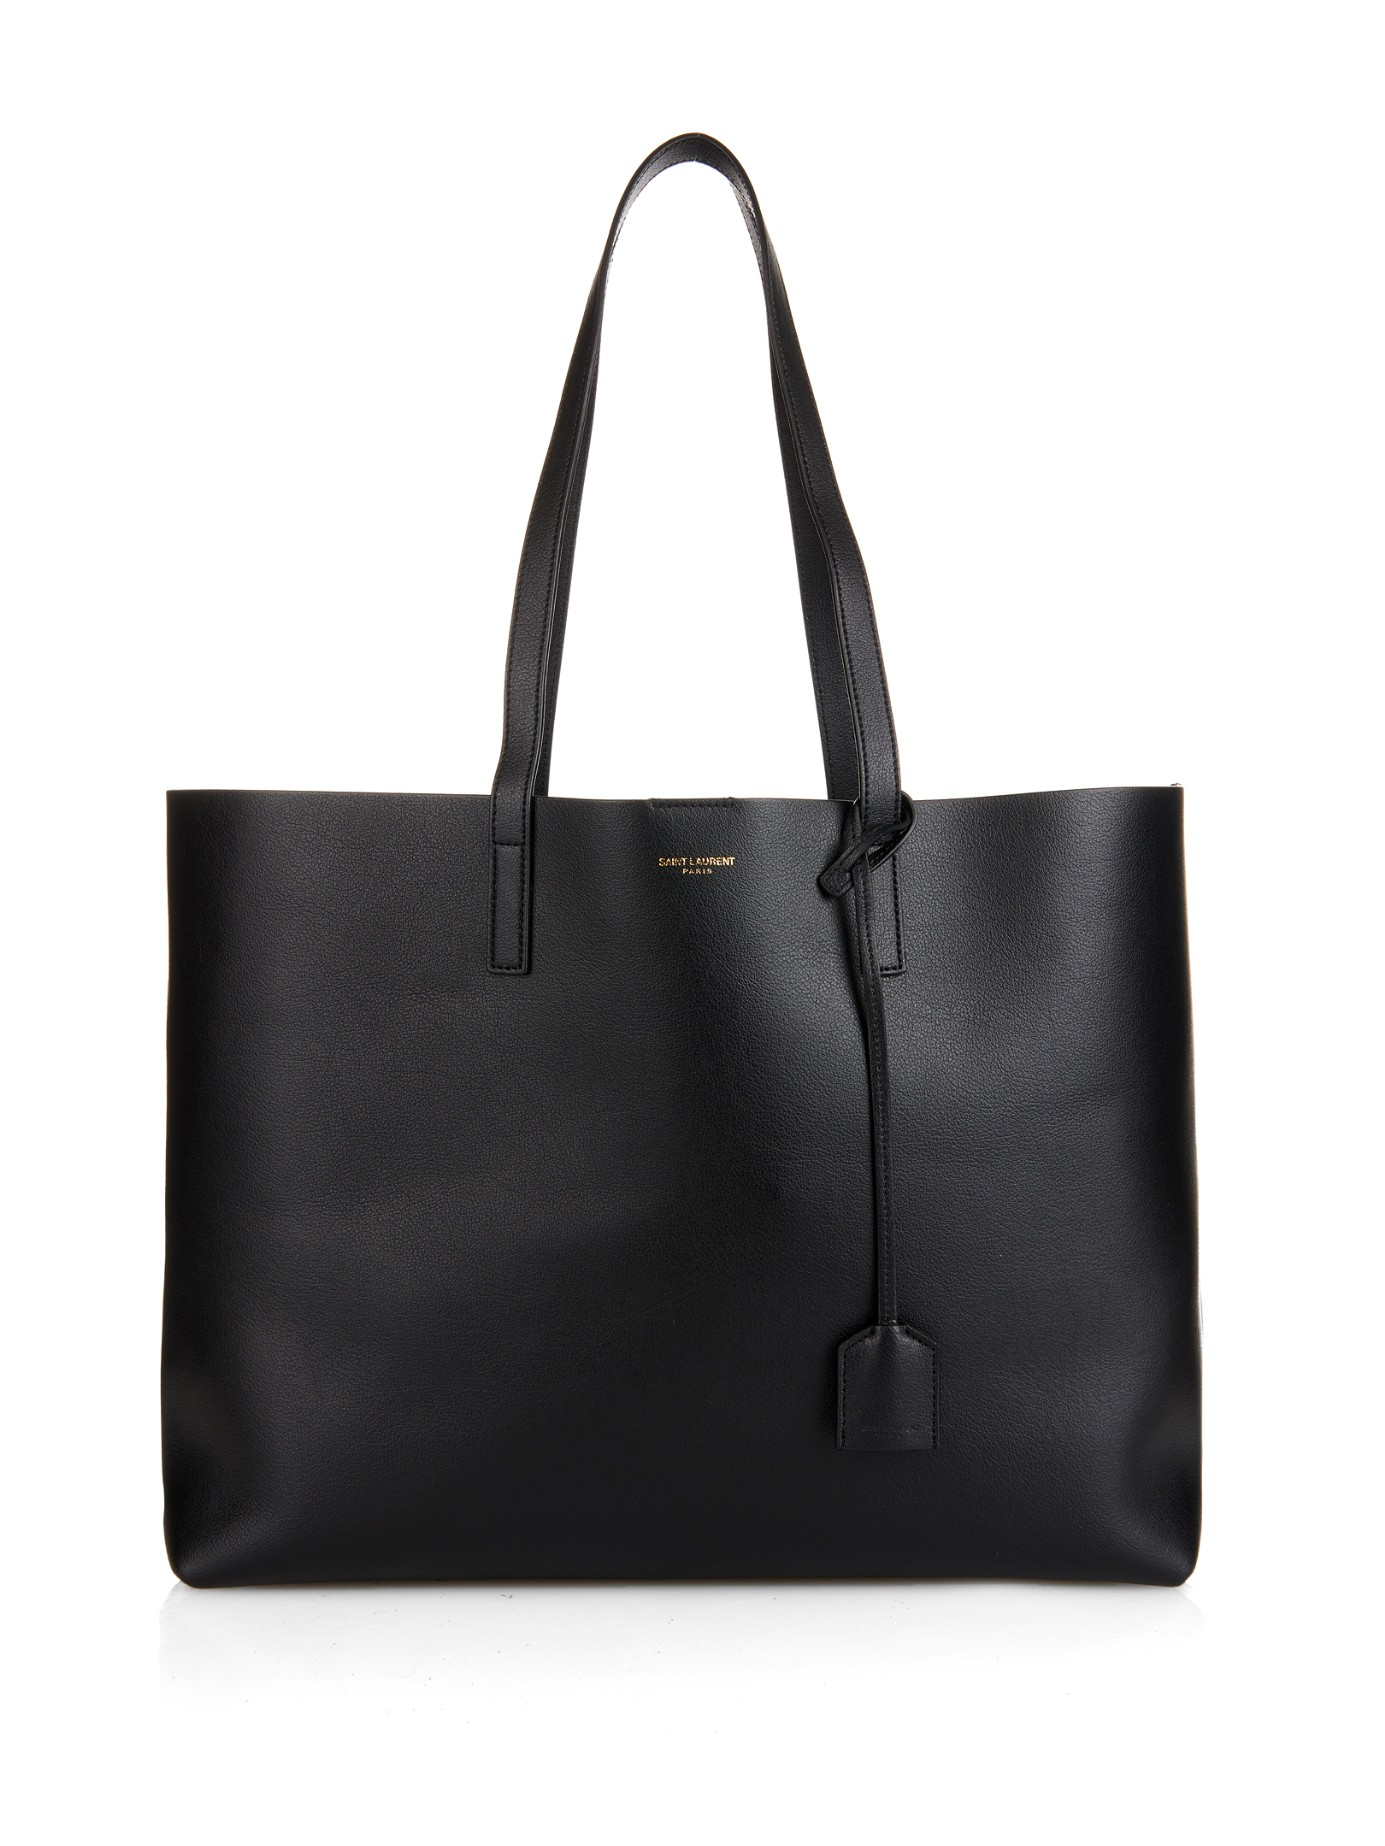 Lyst - Saint Laurent Large Leather Tote in Black